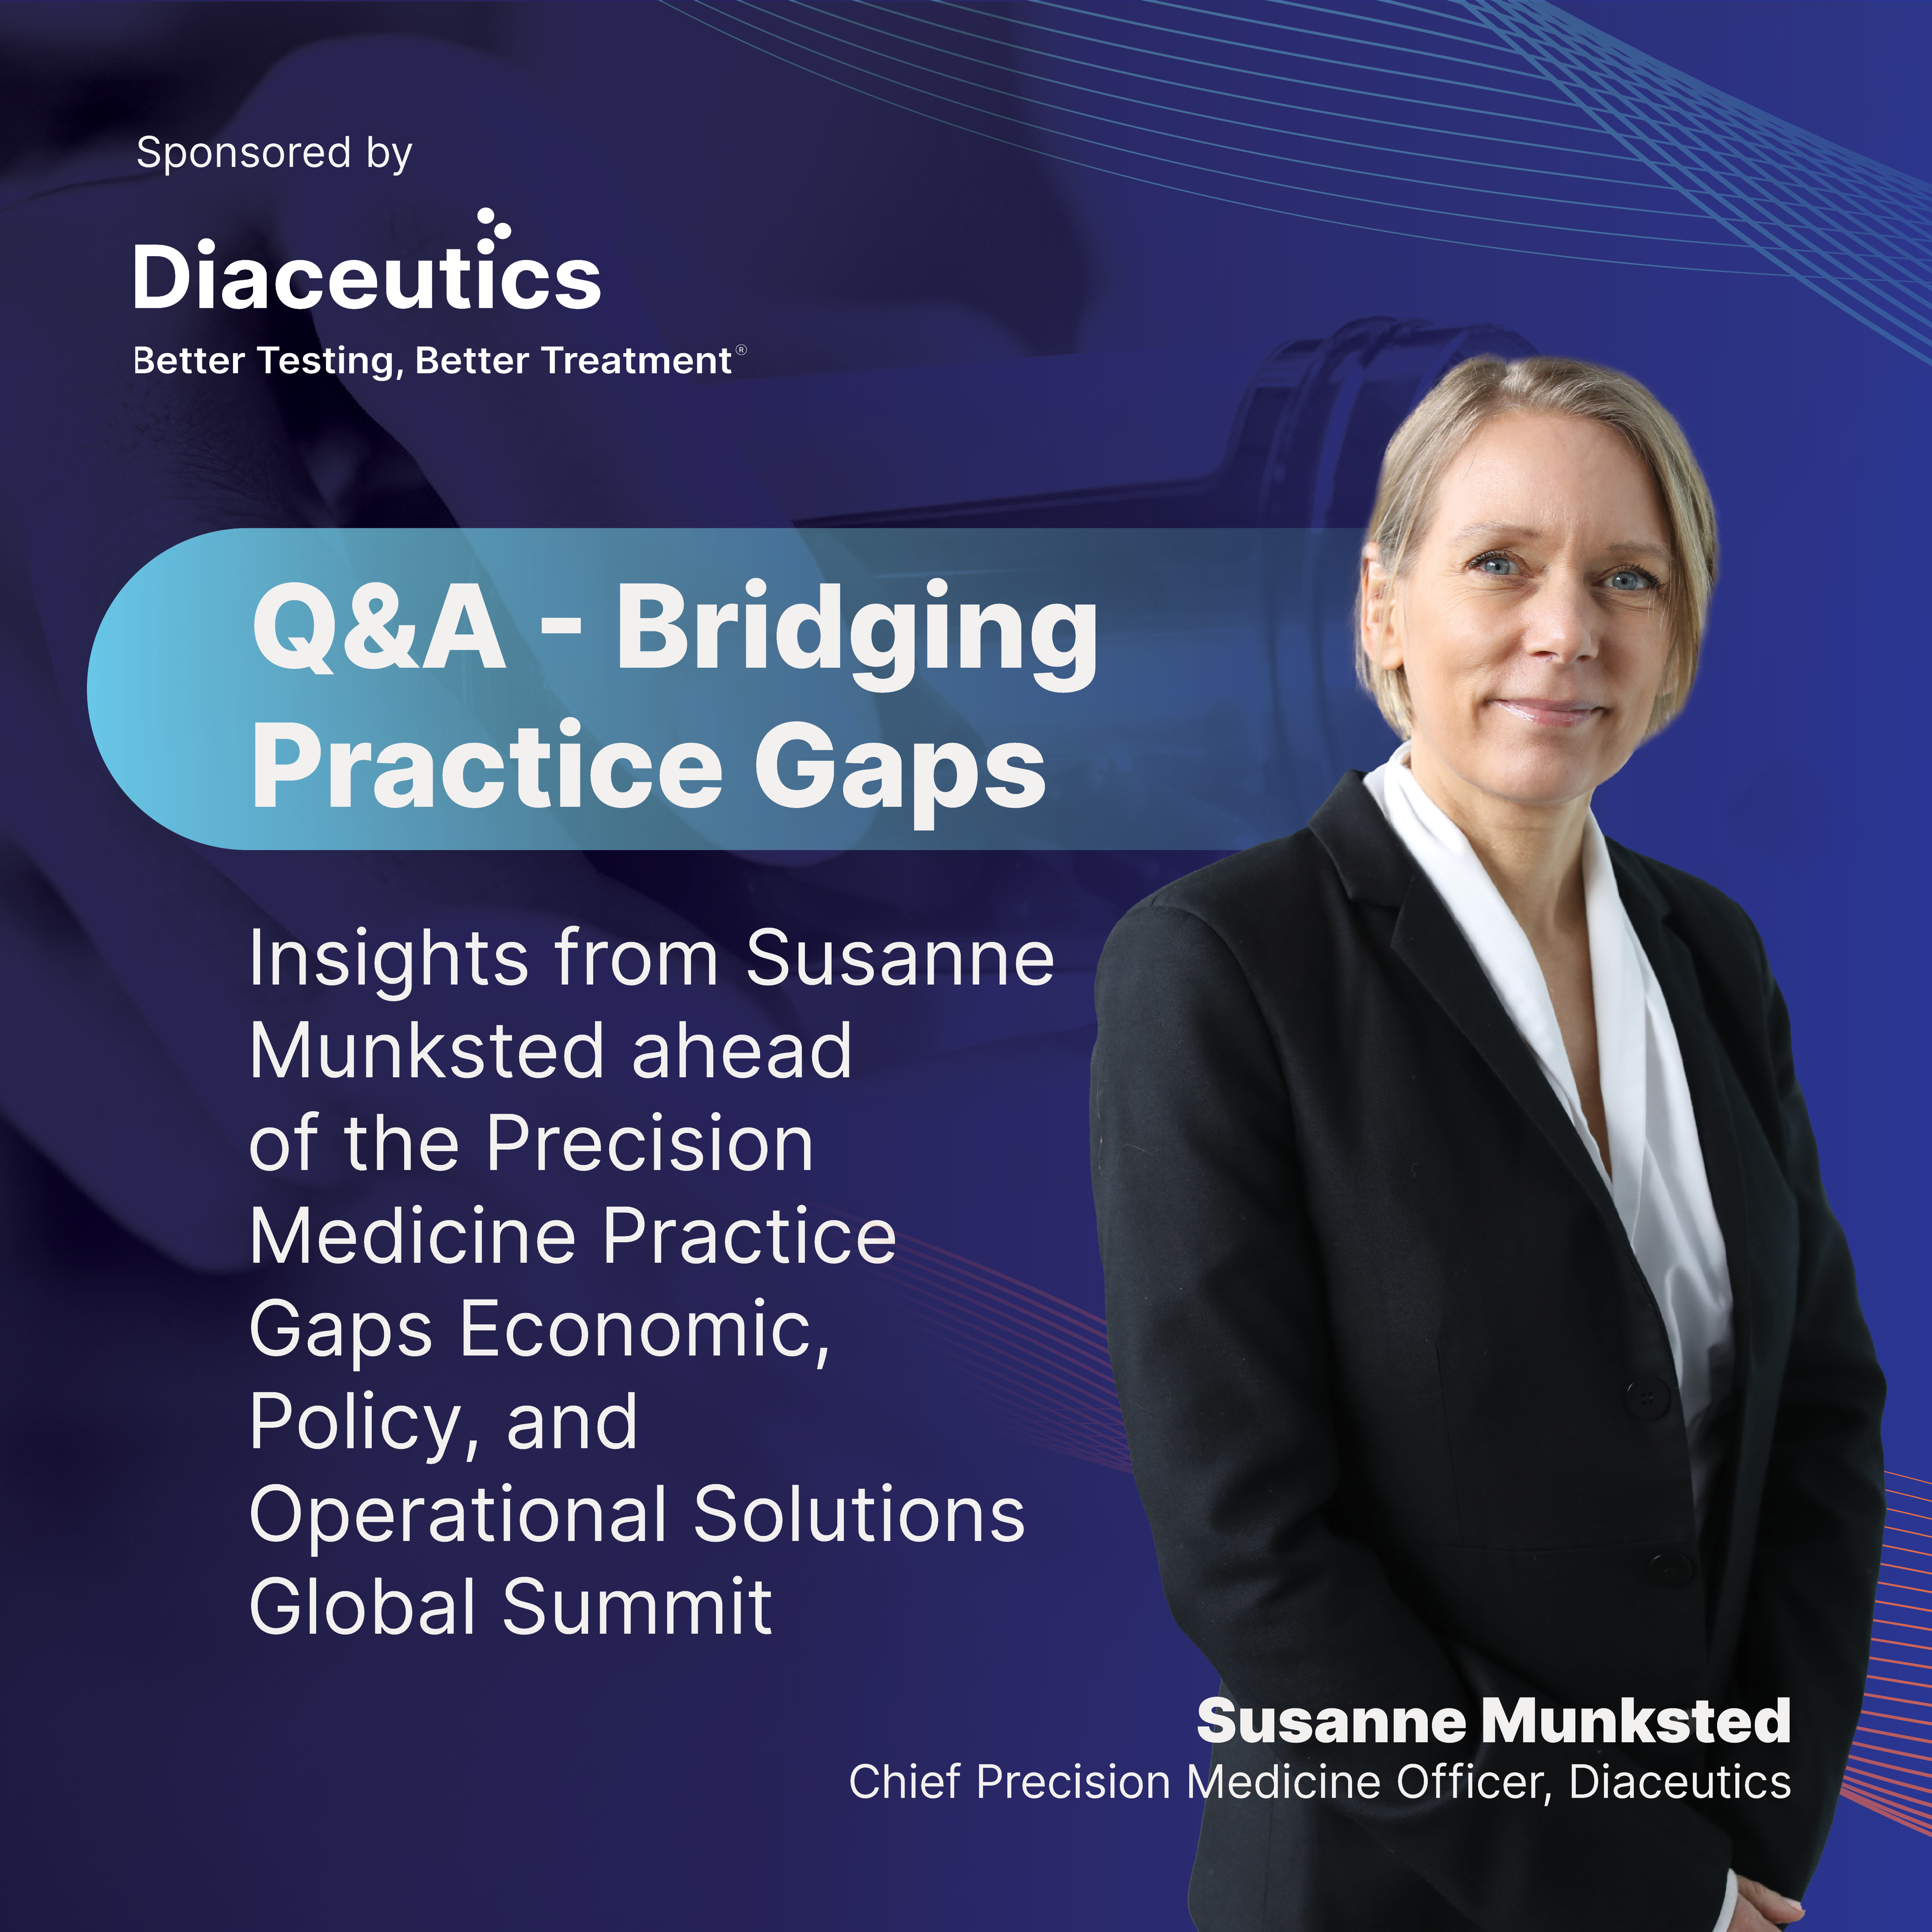 Bridging the Practice Gaps: Insights from Susanne Munksted ahead of the Precision Medicine Practice Gaps Economic, Policy, and Operational Solutions Global Summit